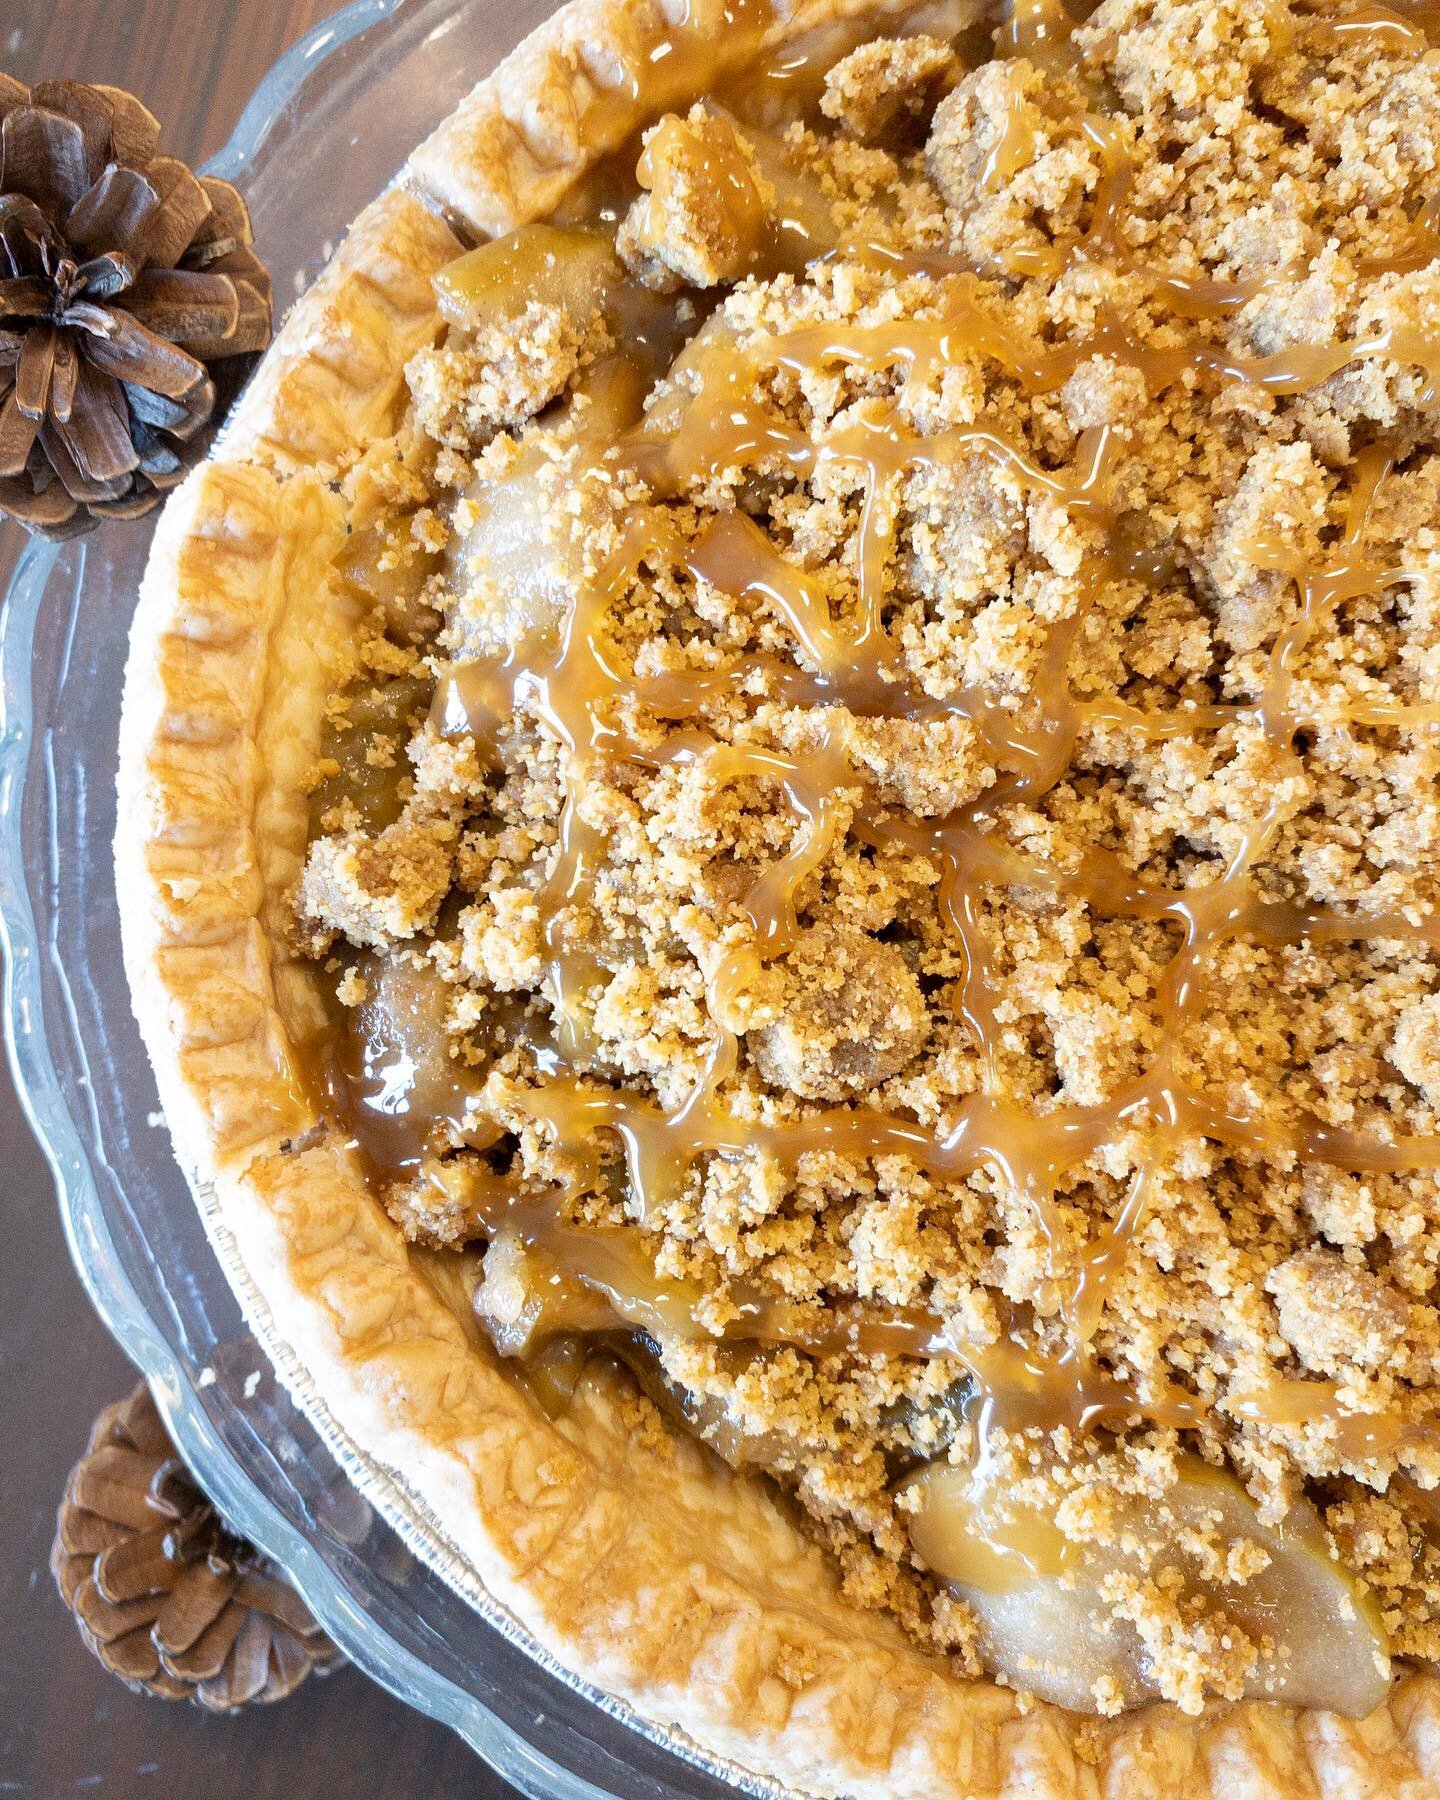 A caramel apple crossed with an apple pie. Our Caramel Apple Crumble Pie is perfect for your Thanksgiving table. 

We still have some pies and trays available for last minute orders for Thanksgiving. 

As a reminder, we&rsquo;re closed for pickup onl